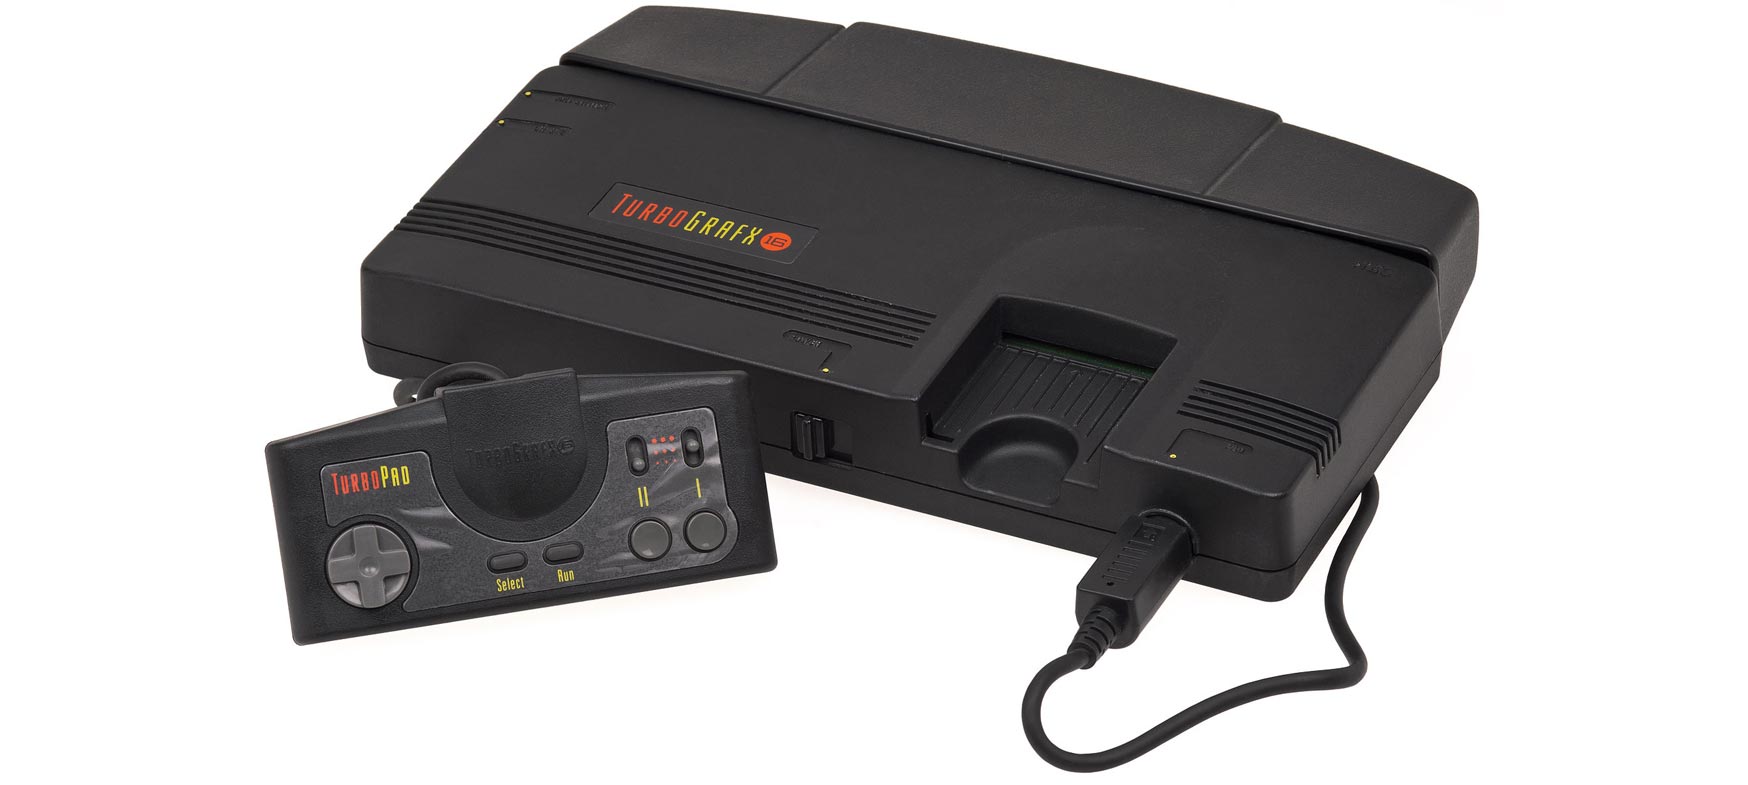 Go TURBO! The Cult Following of the TurboGrafx-16